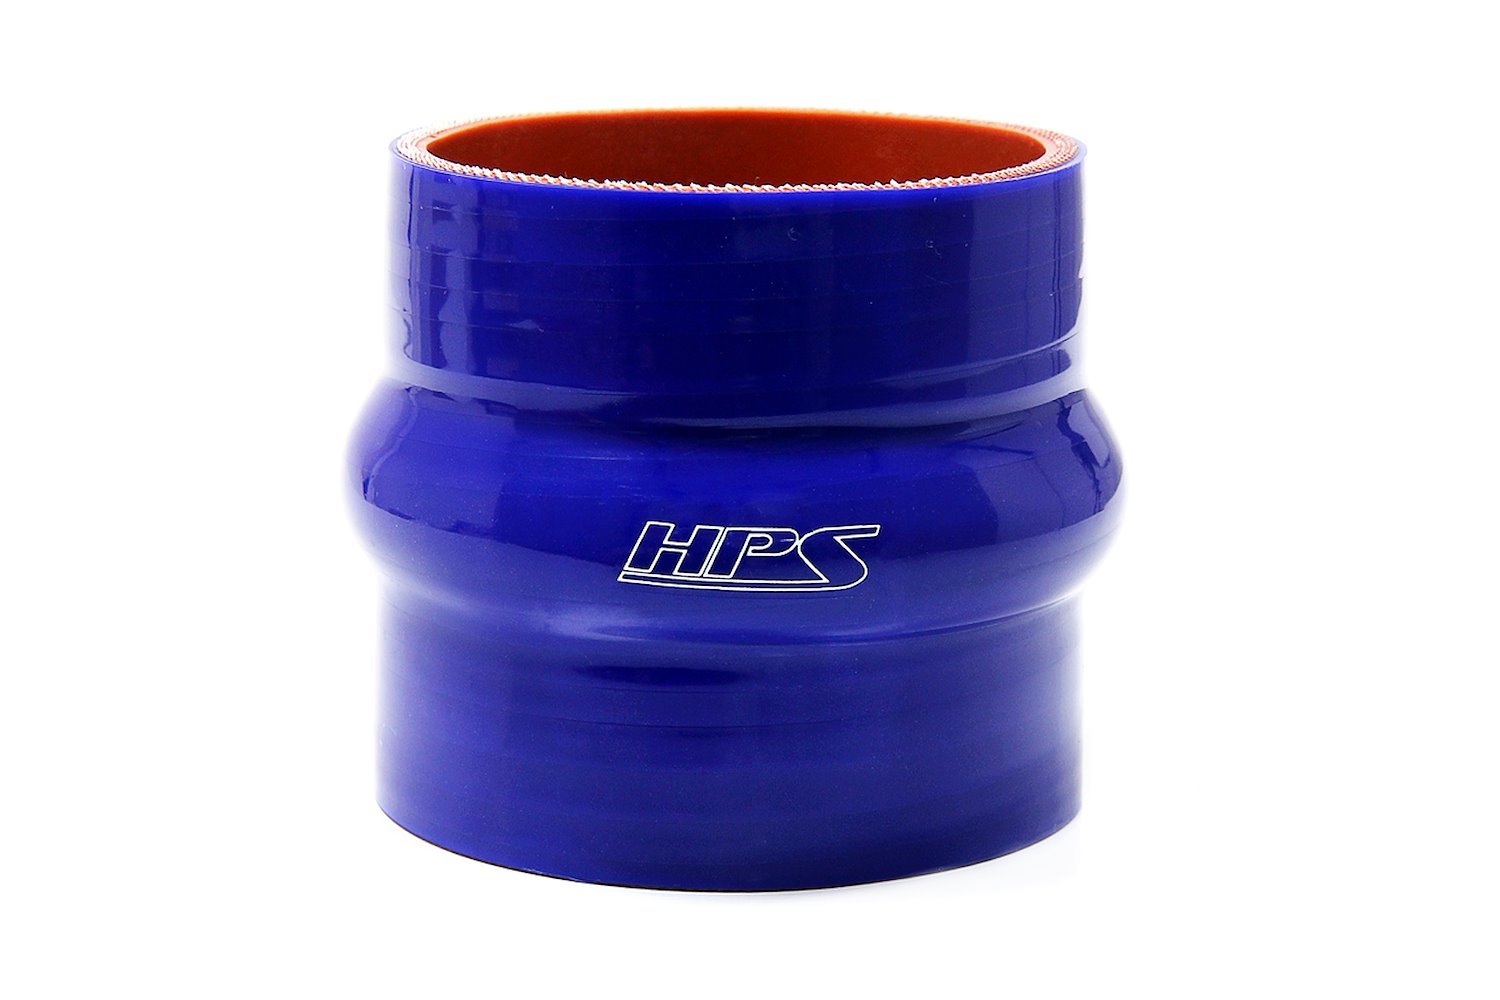 HTSHC-225-L6-BLUE Silicone Hump Coupler Hose, High-Temp 4-Ply Reinforced, 2-1/4 in. ID, 6 in. Long, Blue